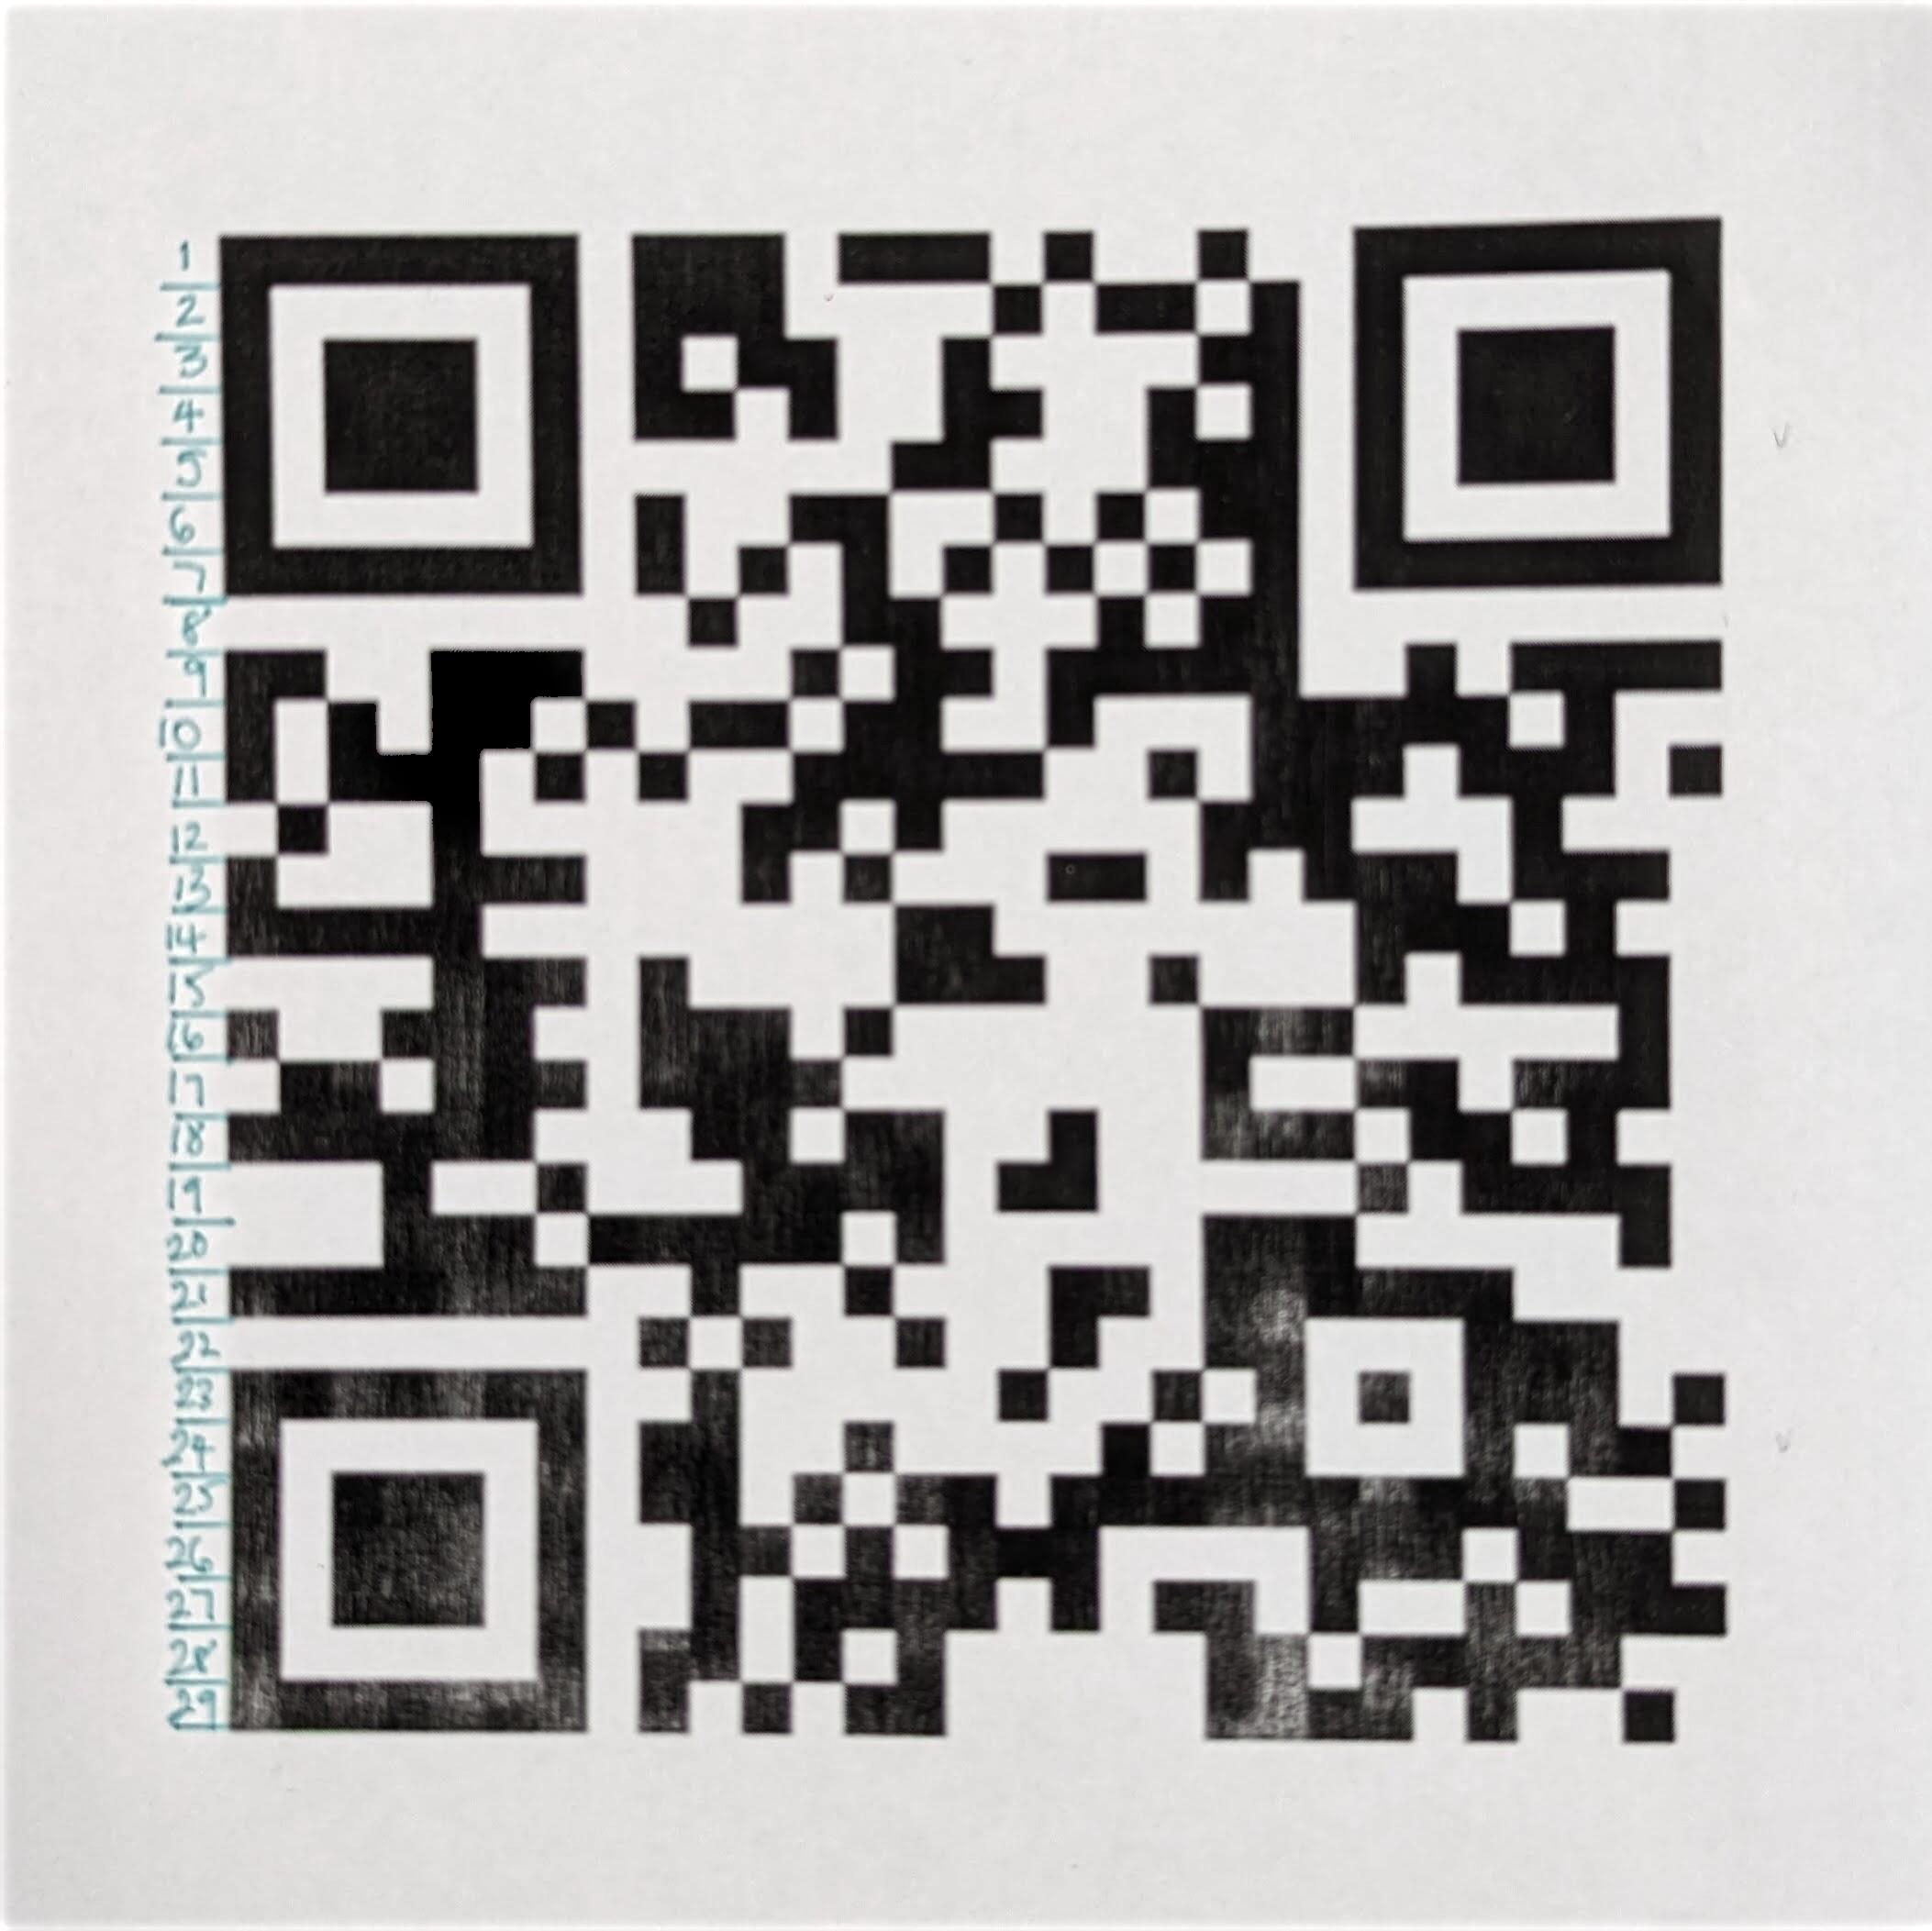 Image of QR code printed with line numbers added